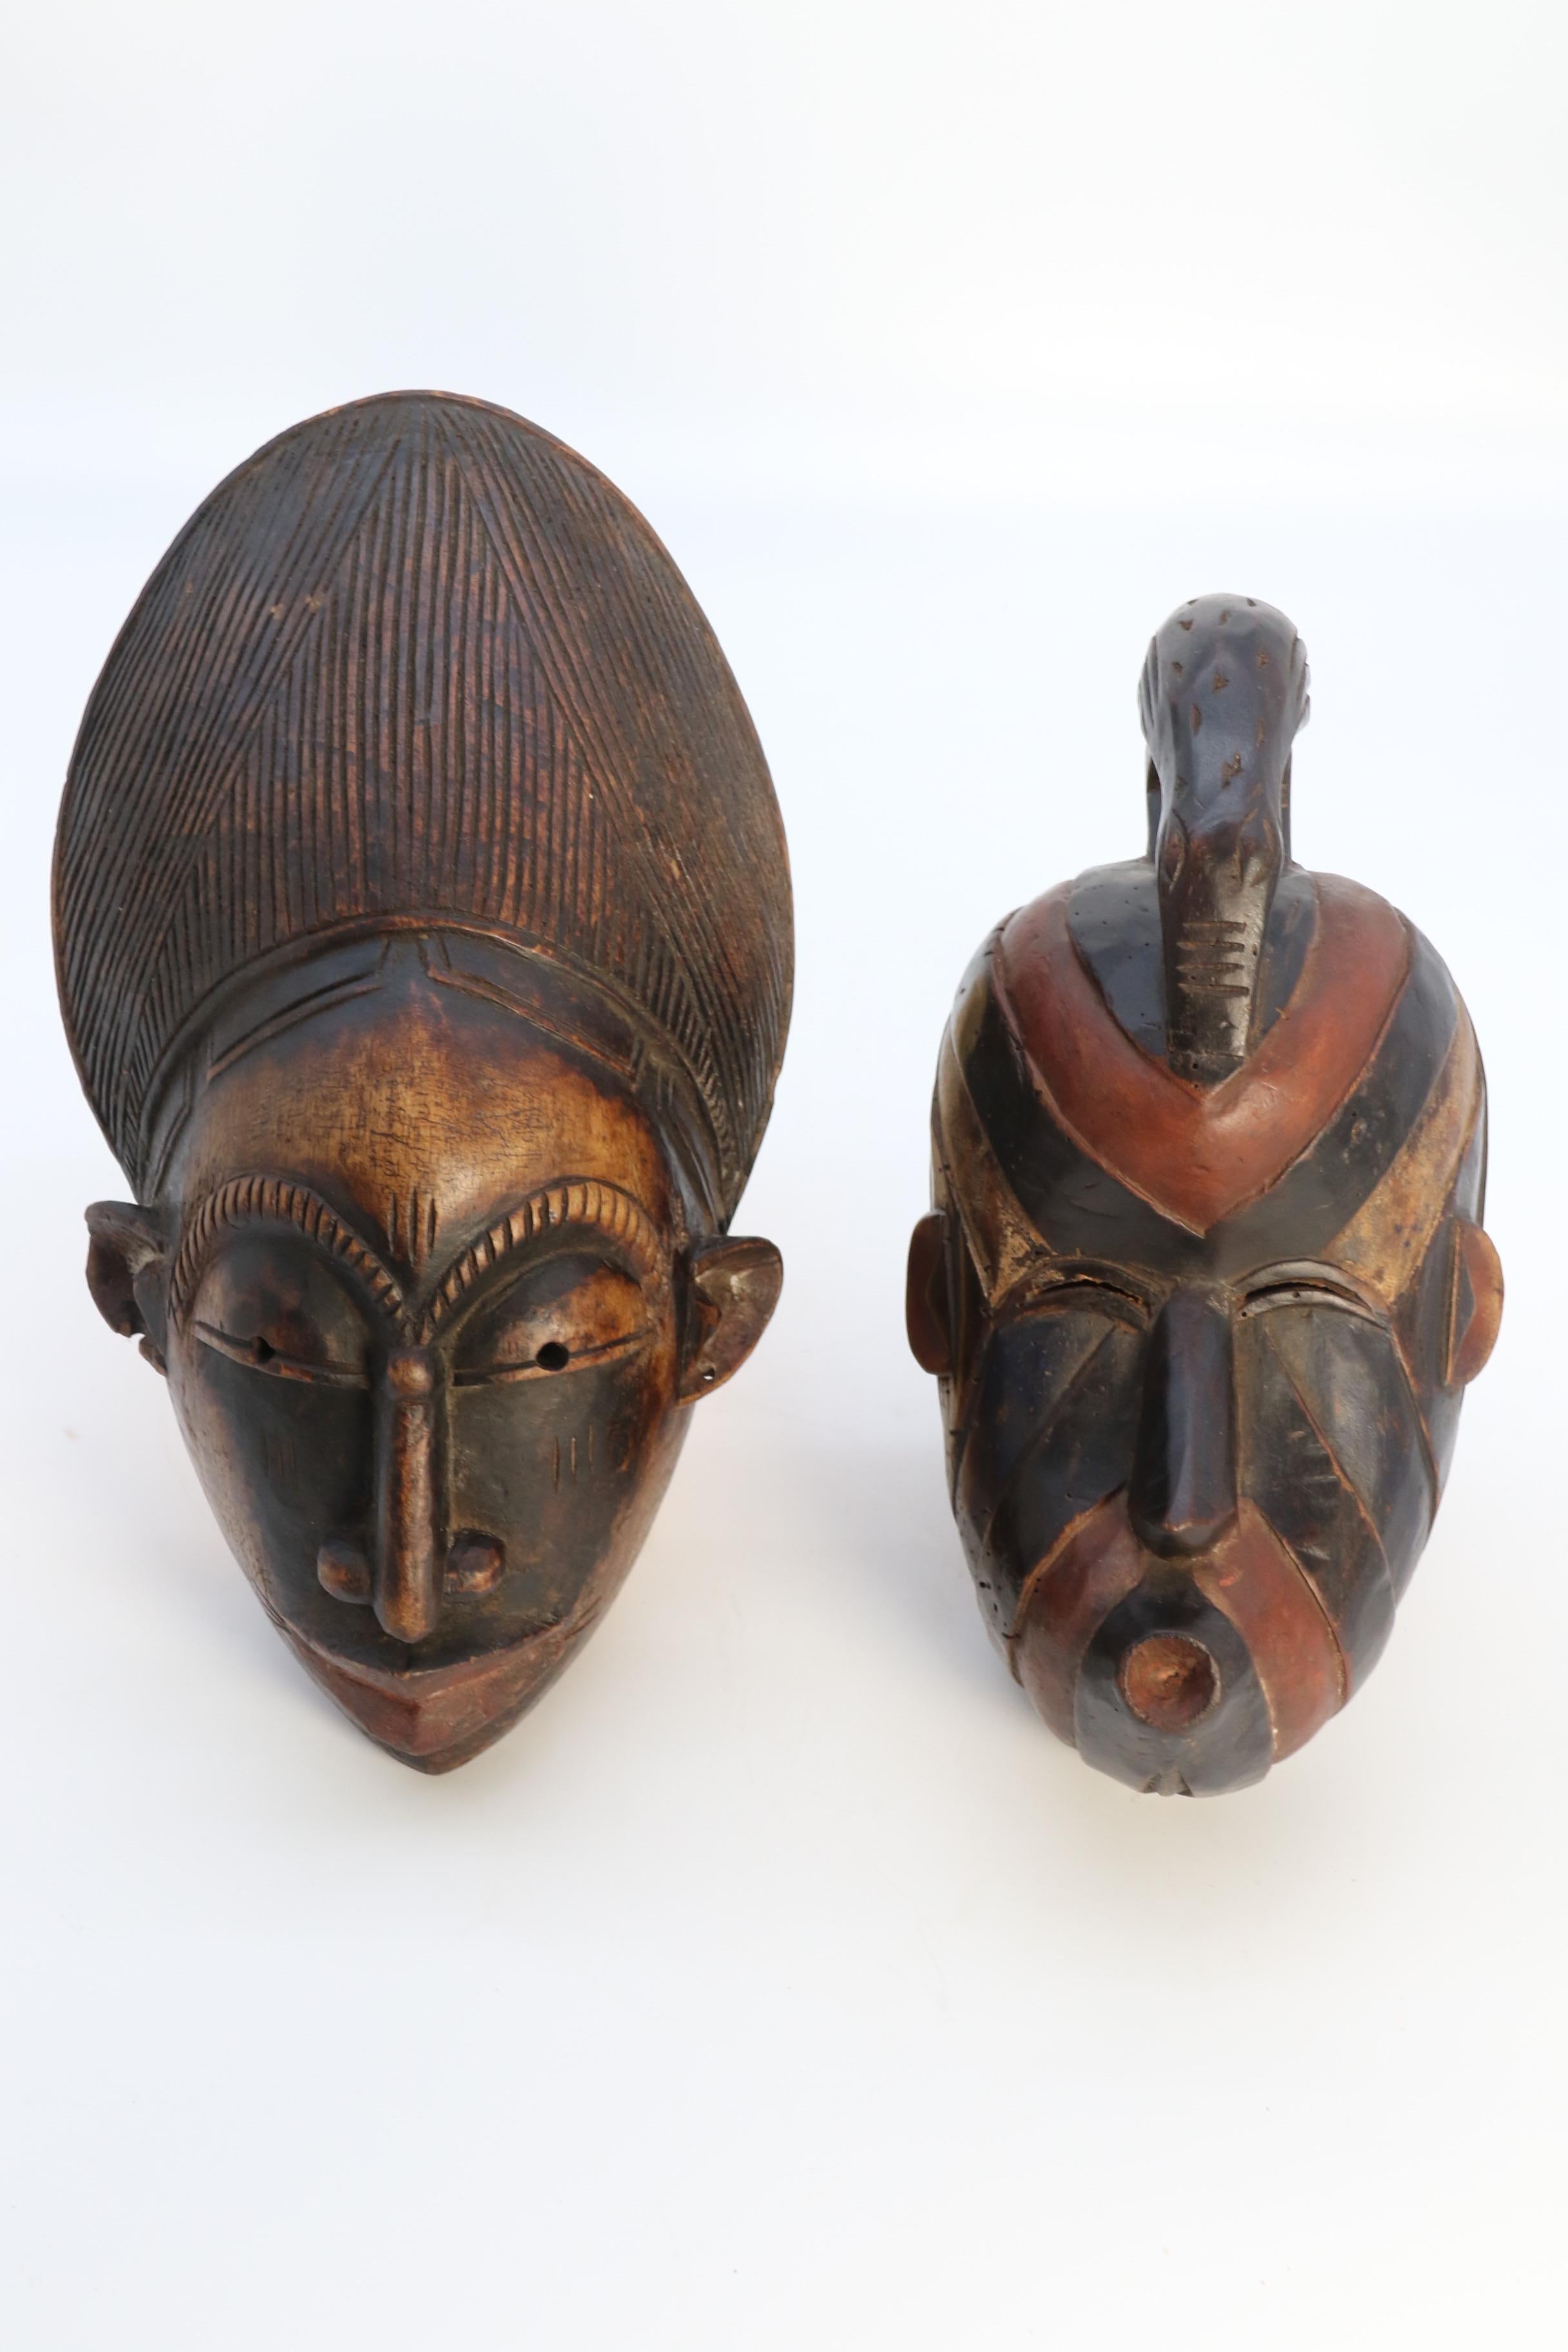 Other A matched pair of African tribal dance face masks, circa 1920